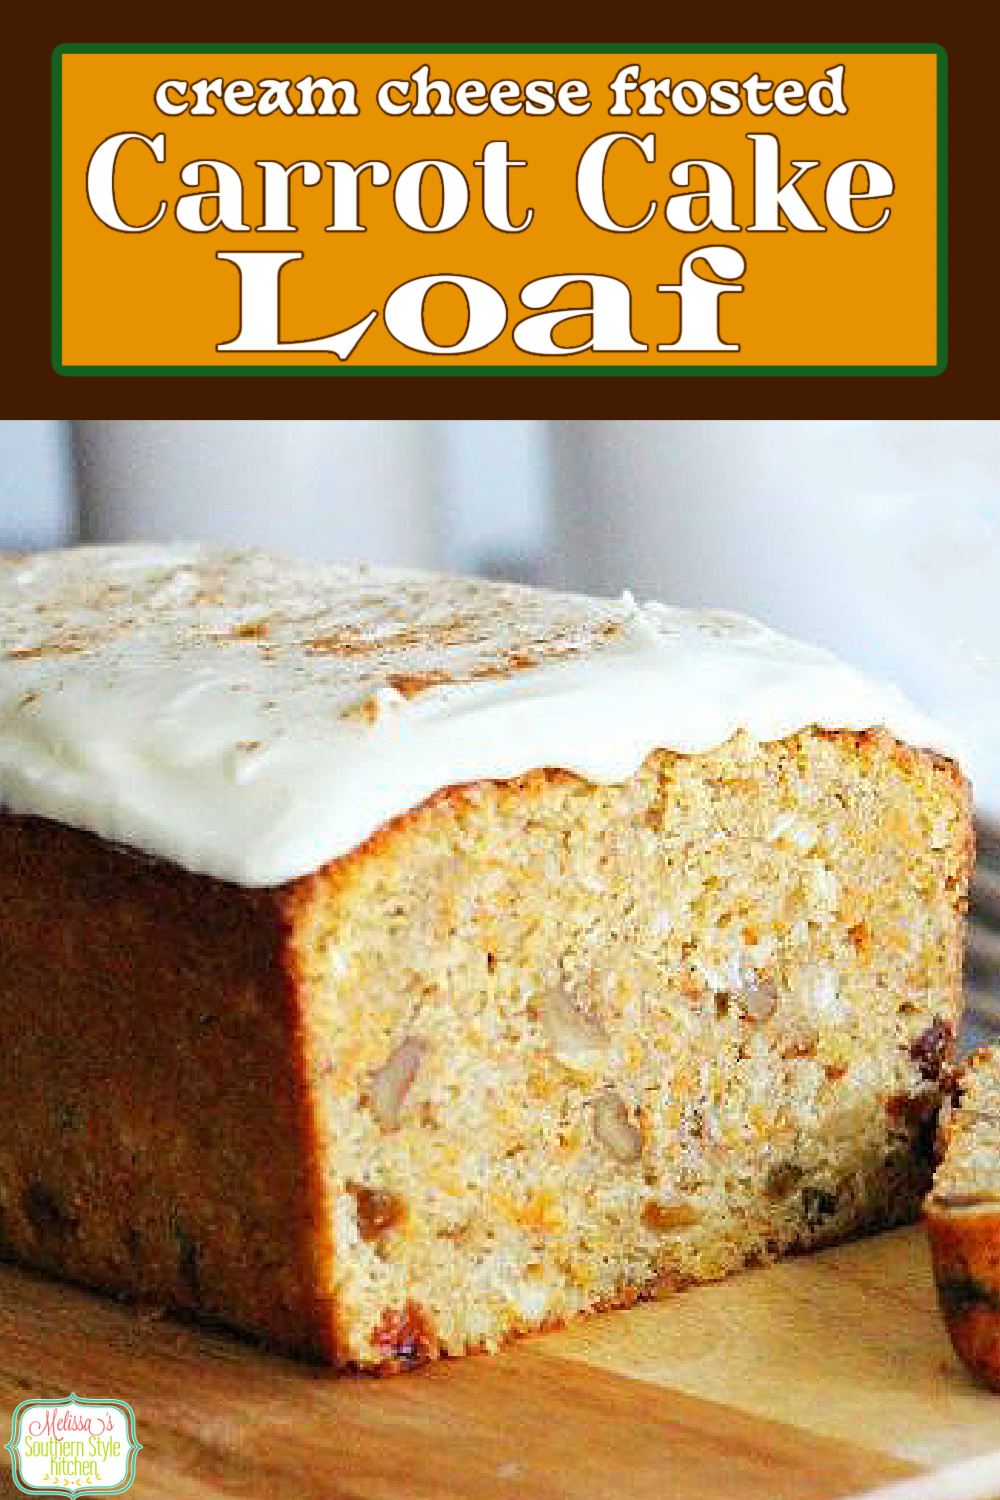 Enjoy a slice of this Cream Cheese Frosted Carrot Cake Loaf for breakfast, brunch or dessert #carrotcake #carrotcakeloaf #carrotcakerecipes #easterdessets #brunchrecipes #breakfastrecipes #loafcakerecipes #creamcheesefrosting via @melissasssk